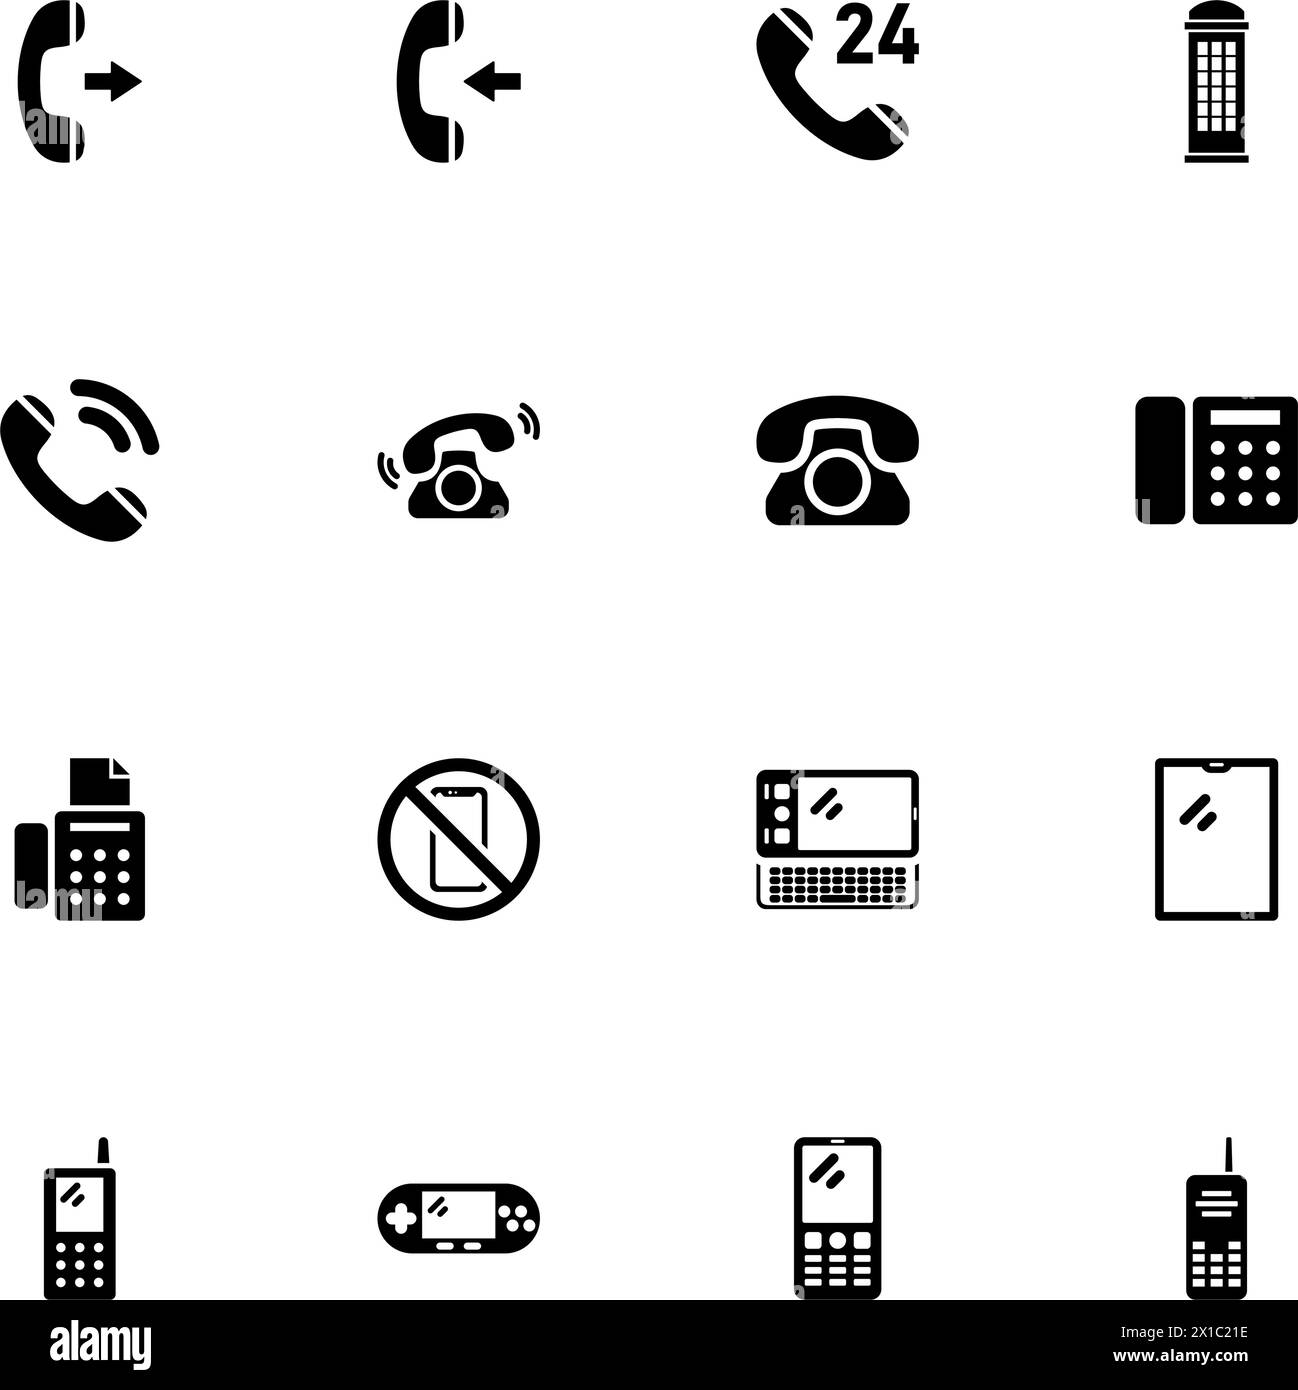 Phones icon - Expand to any size - Change to any colour. Perfect Flat Vector Contains such Icons as fax, voip, telephone, call, voice, antenna, teleco Stock Vector